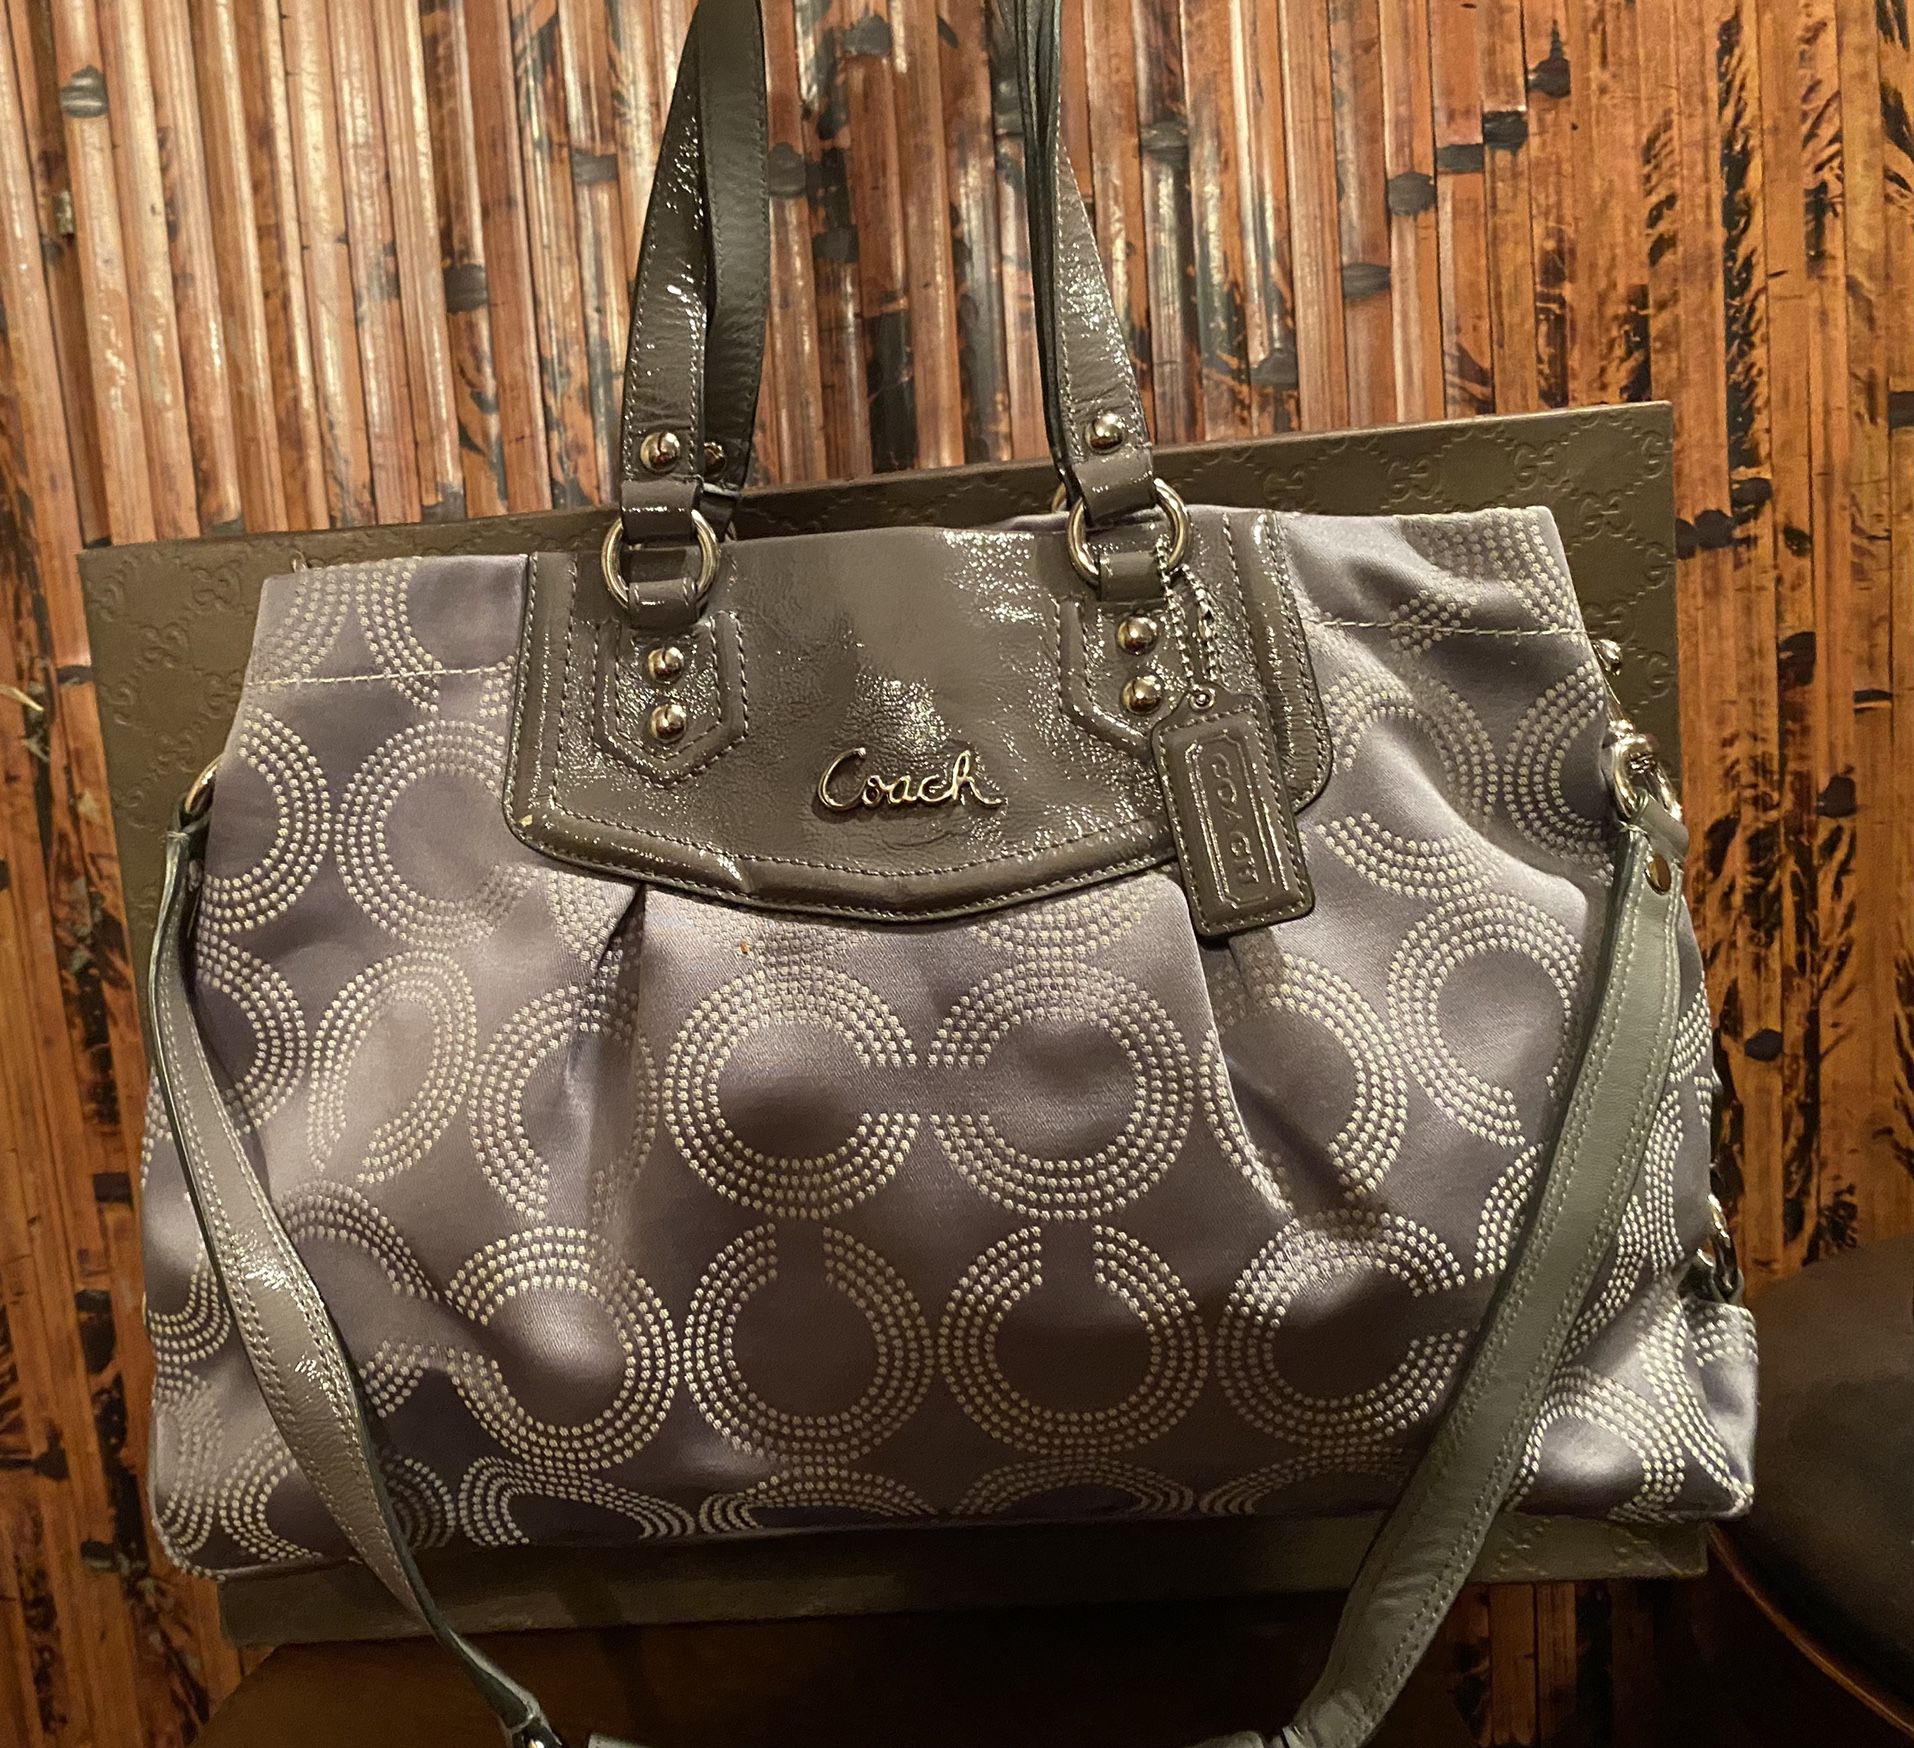 Salmon pink Coach Crossbody Bag for Sale in Queens, NY - OfferUp